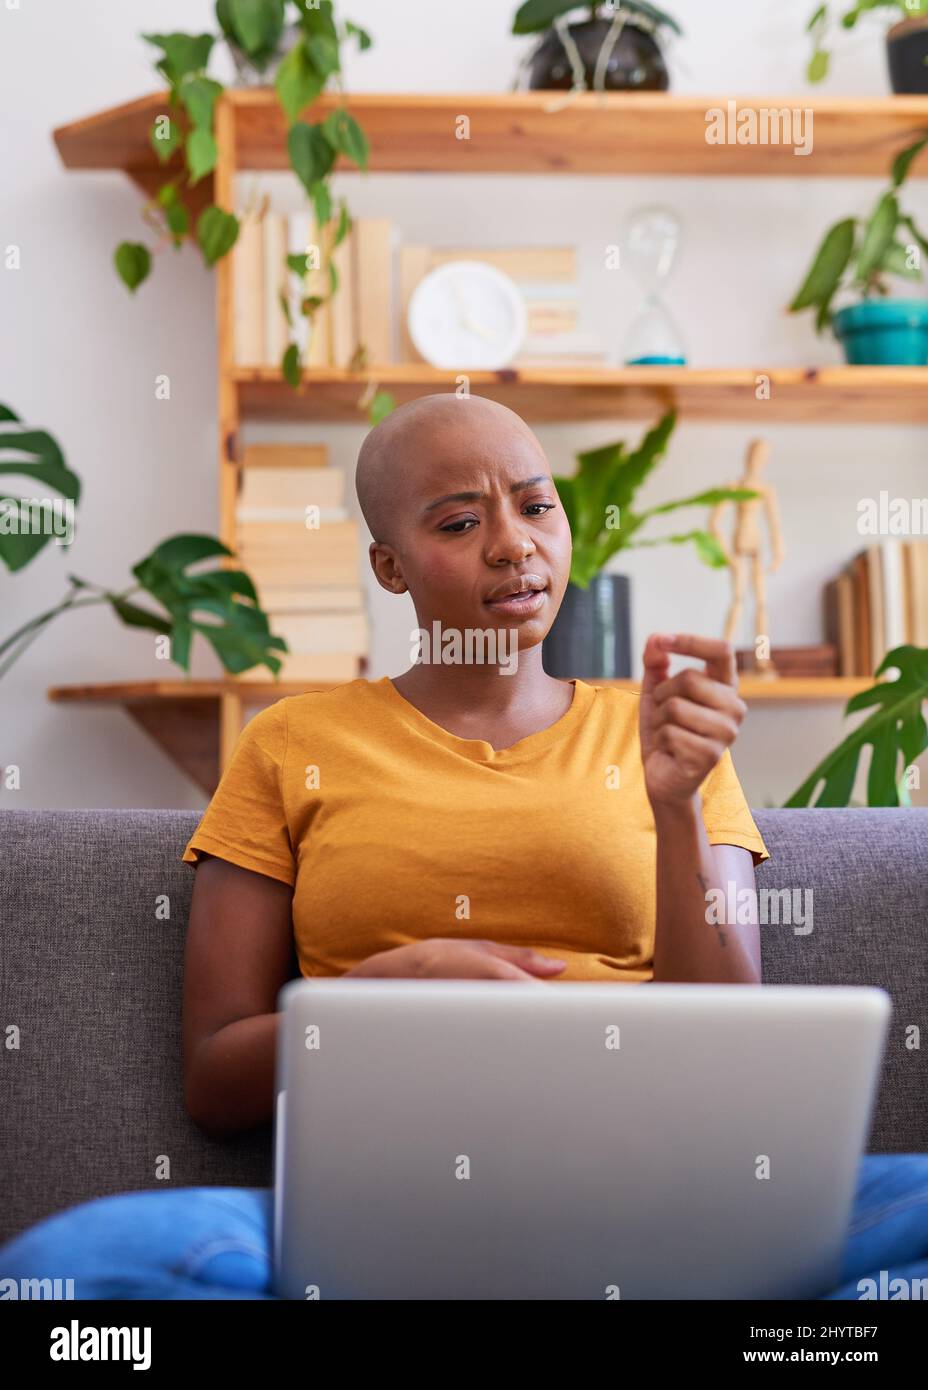 A young woman makes a point during a teleconference call from home Stock Photo